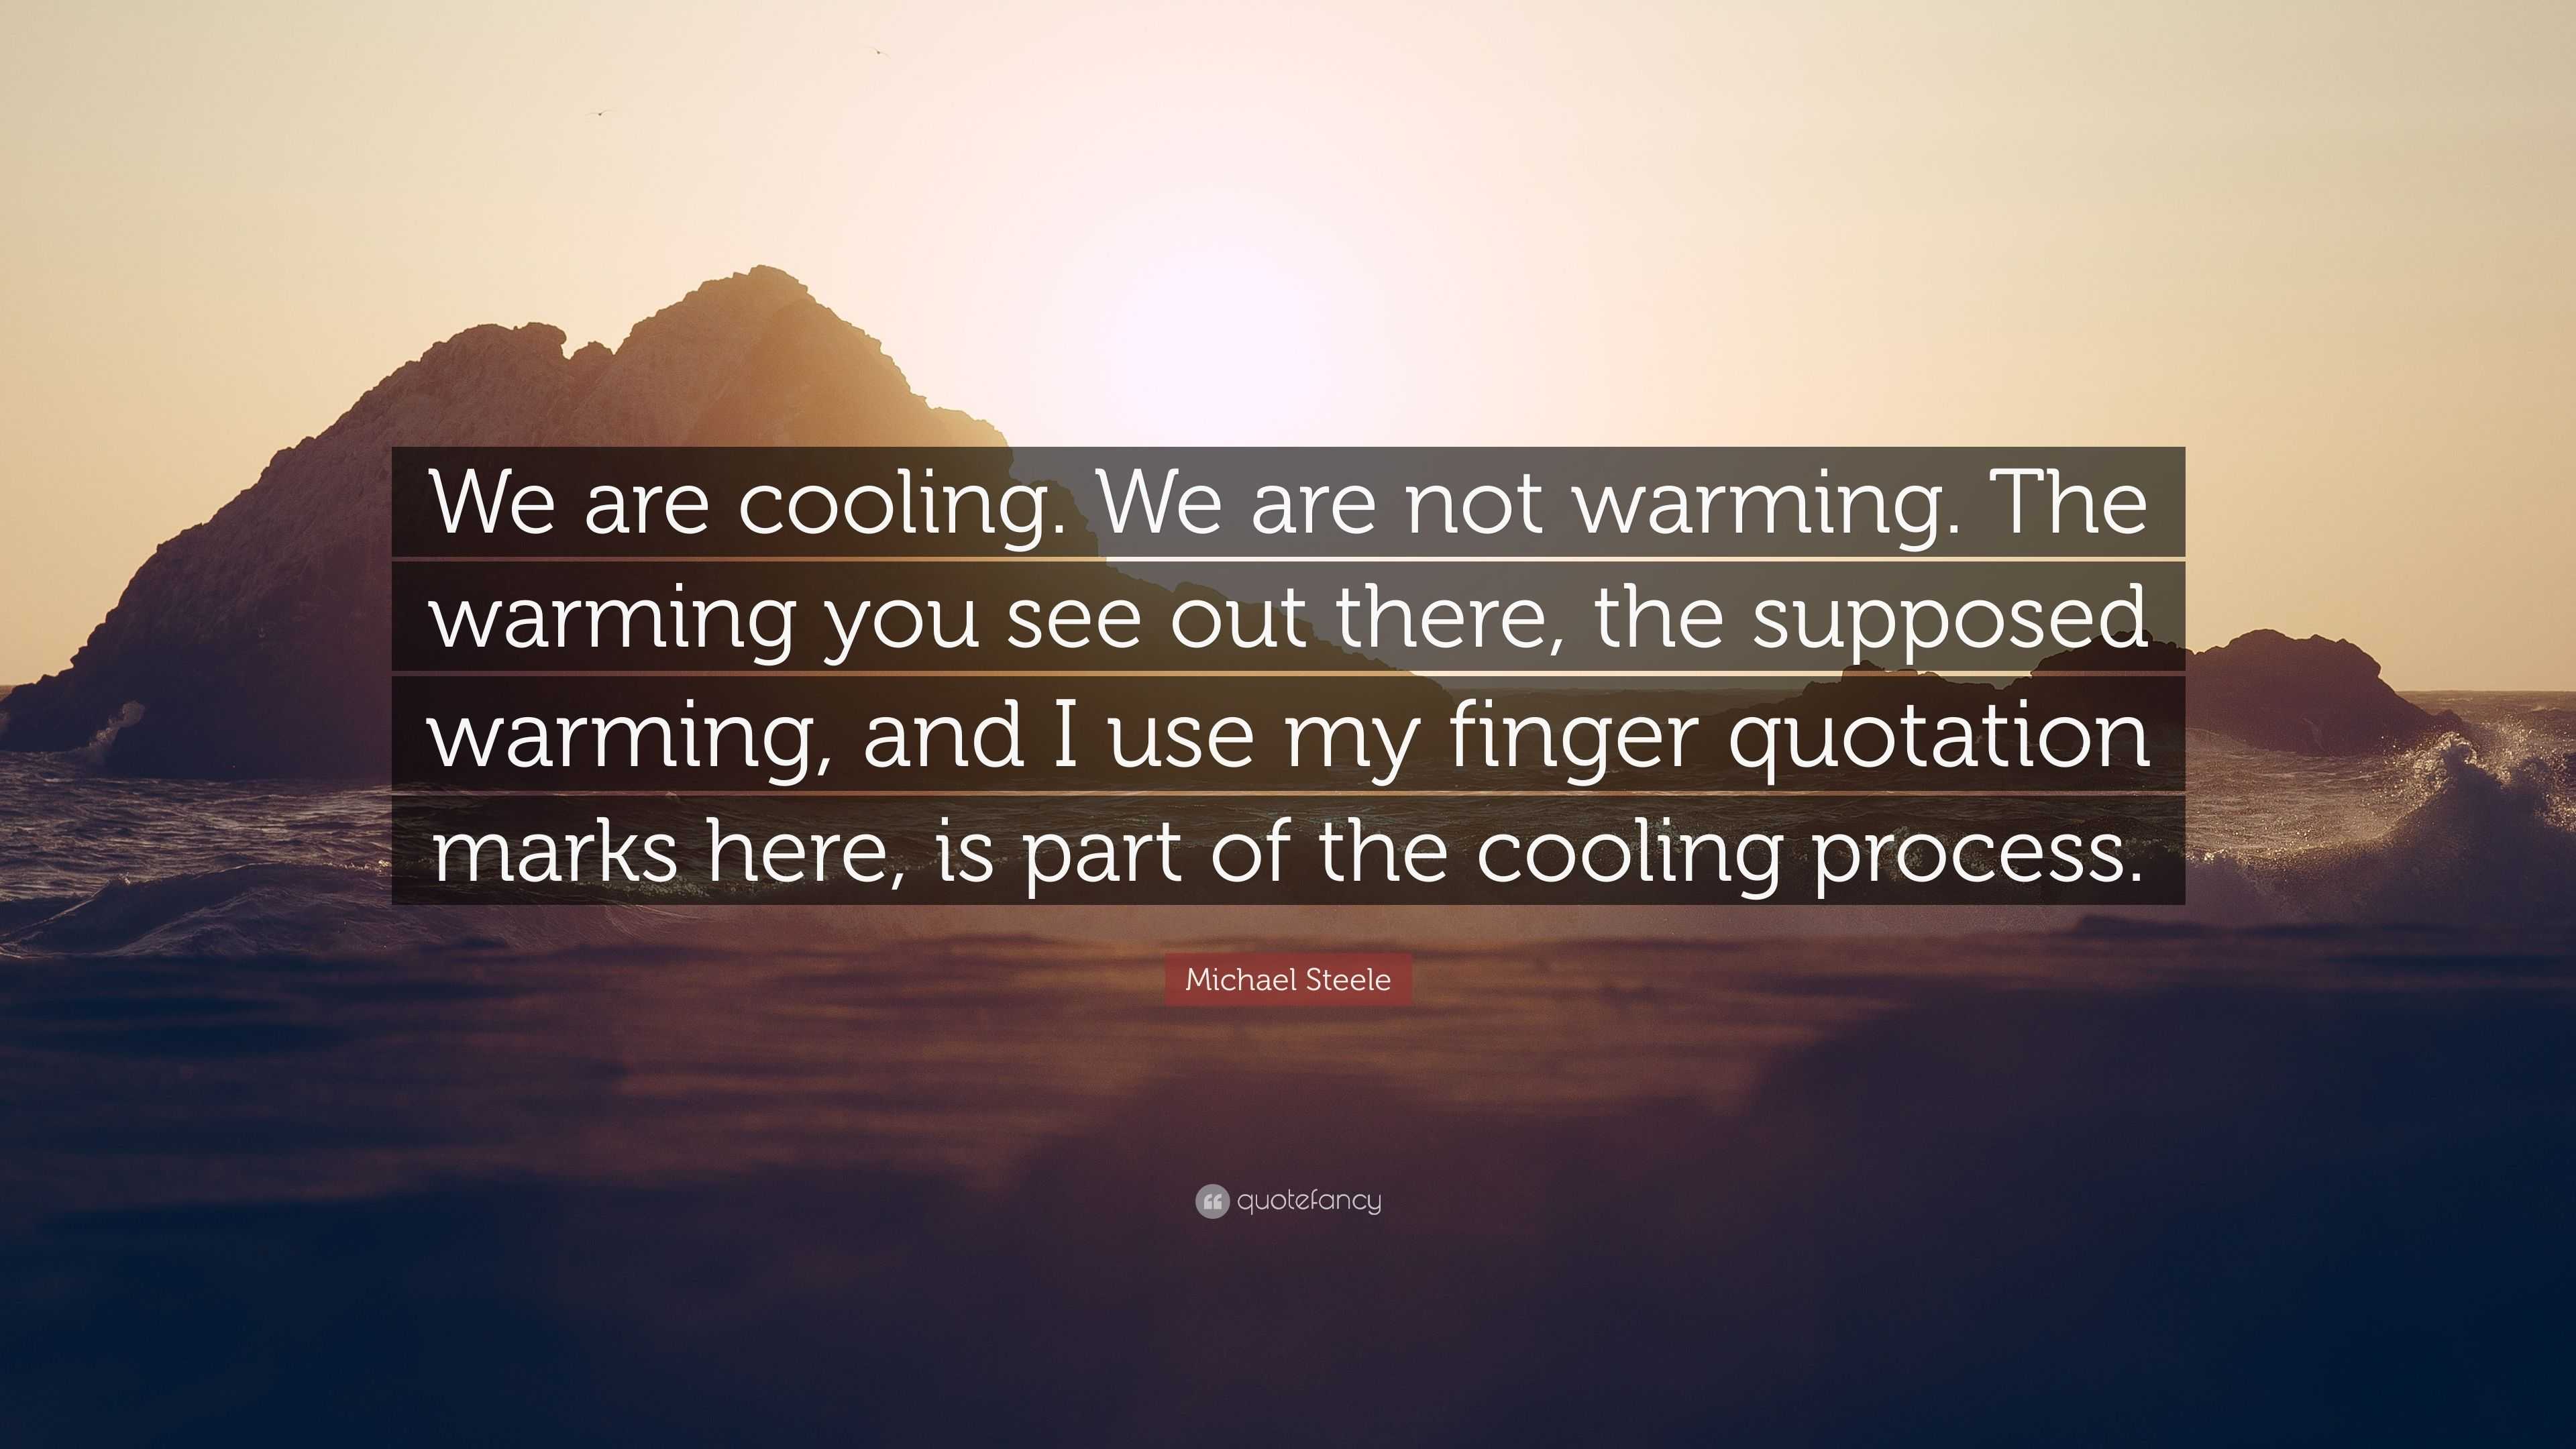 Michael Steele Quote: “We are cooling. We are not warming. The warming ...